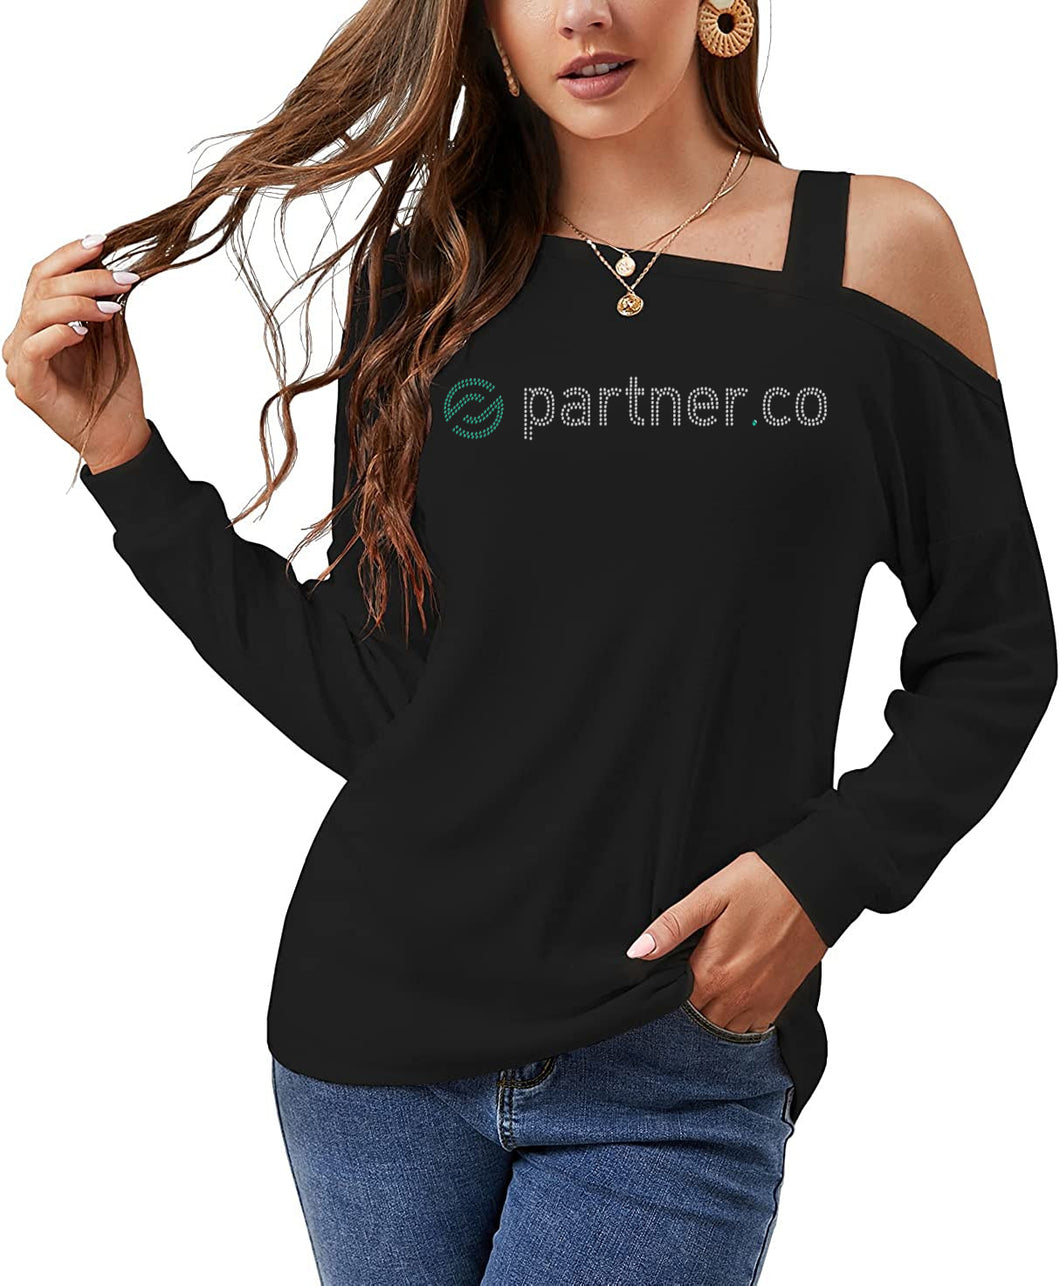 Partner.Co | BLING BUSINESS CASUAL Women's Cold Shoulder Long Sleeve Top